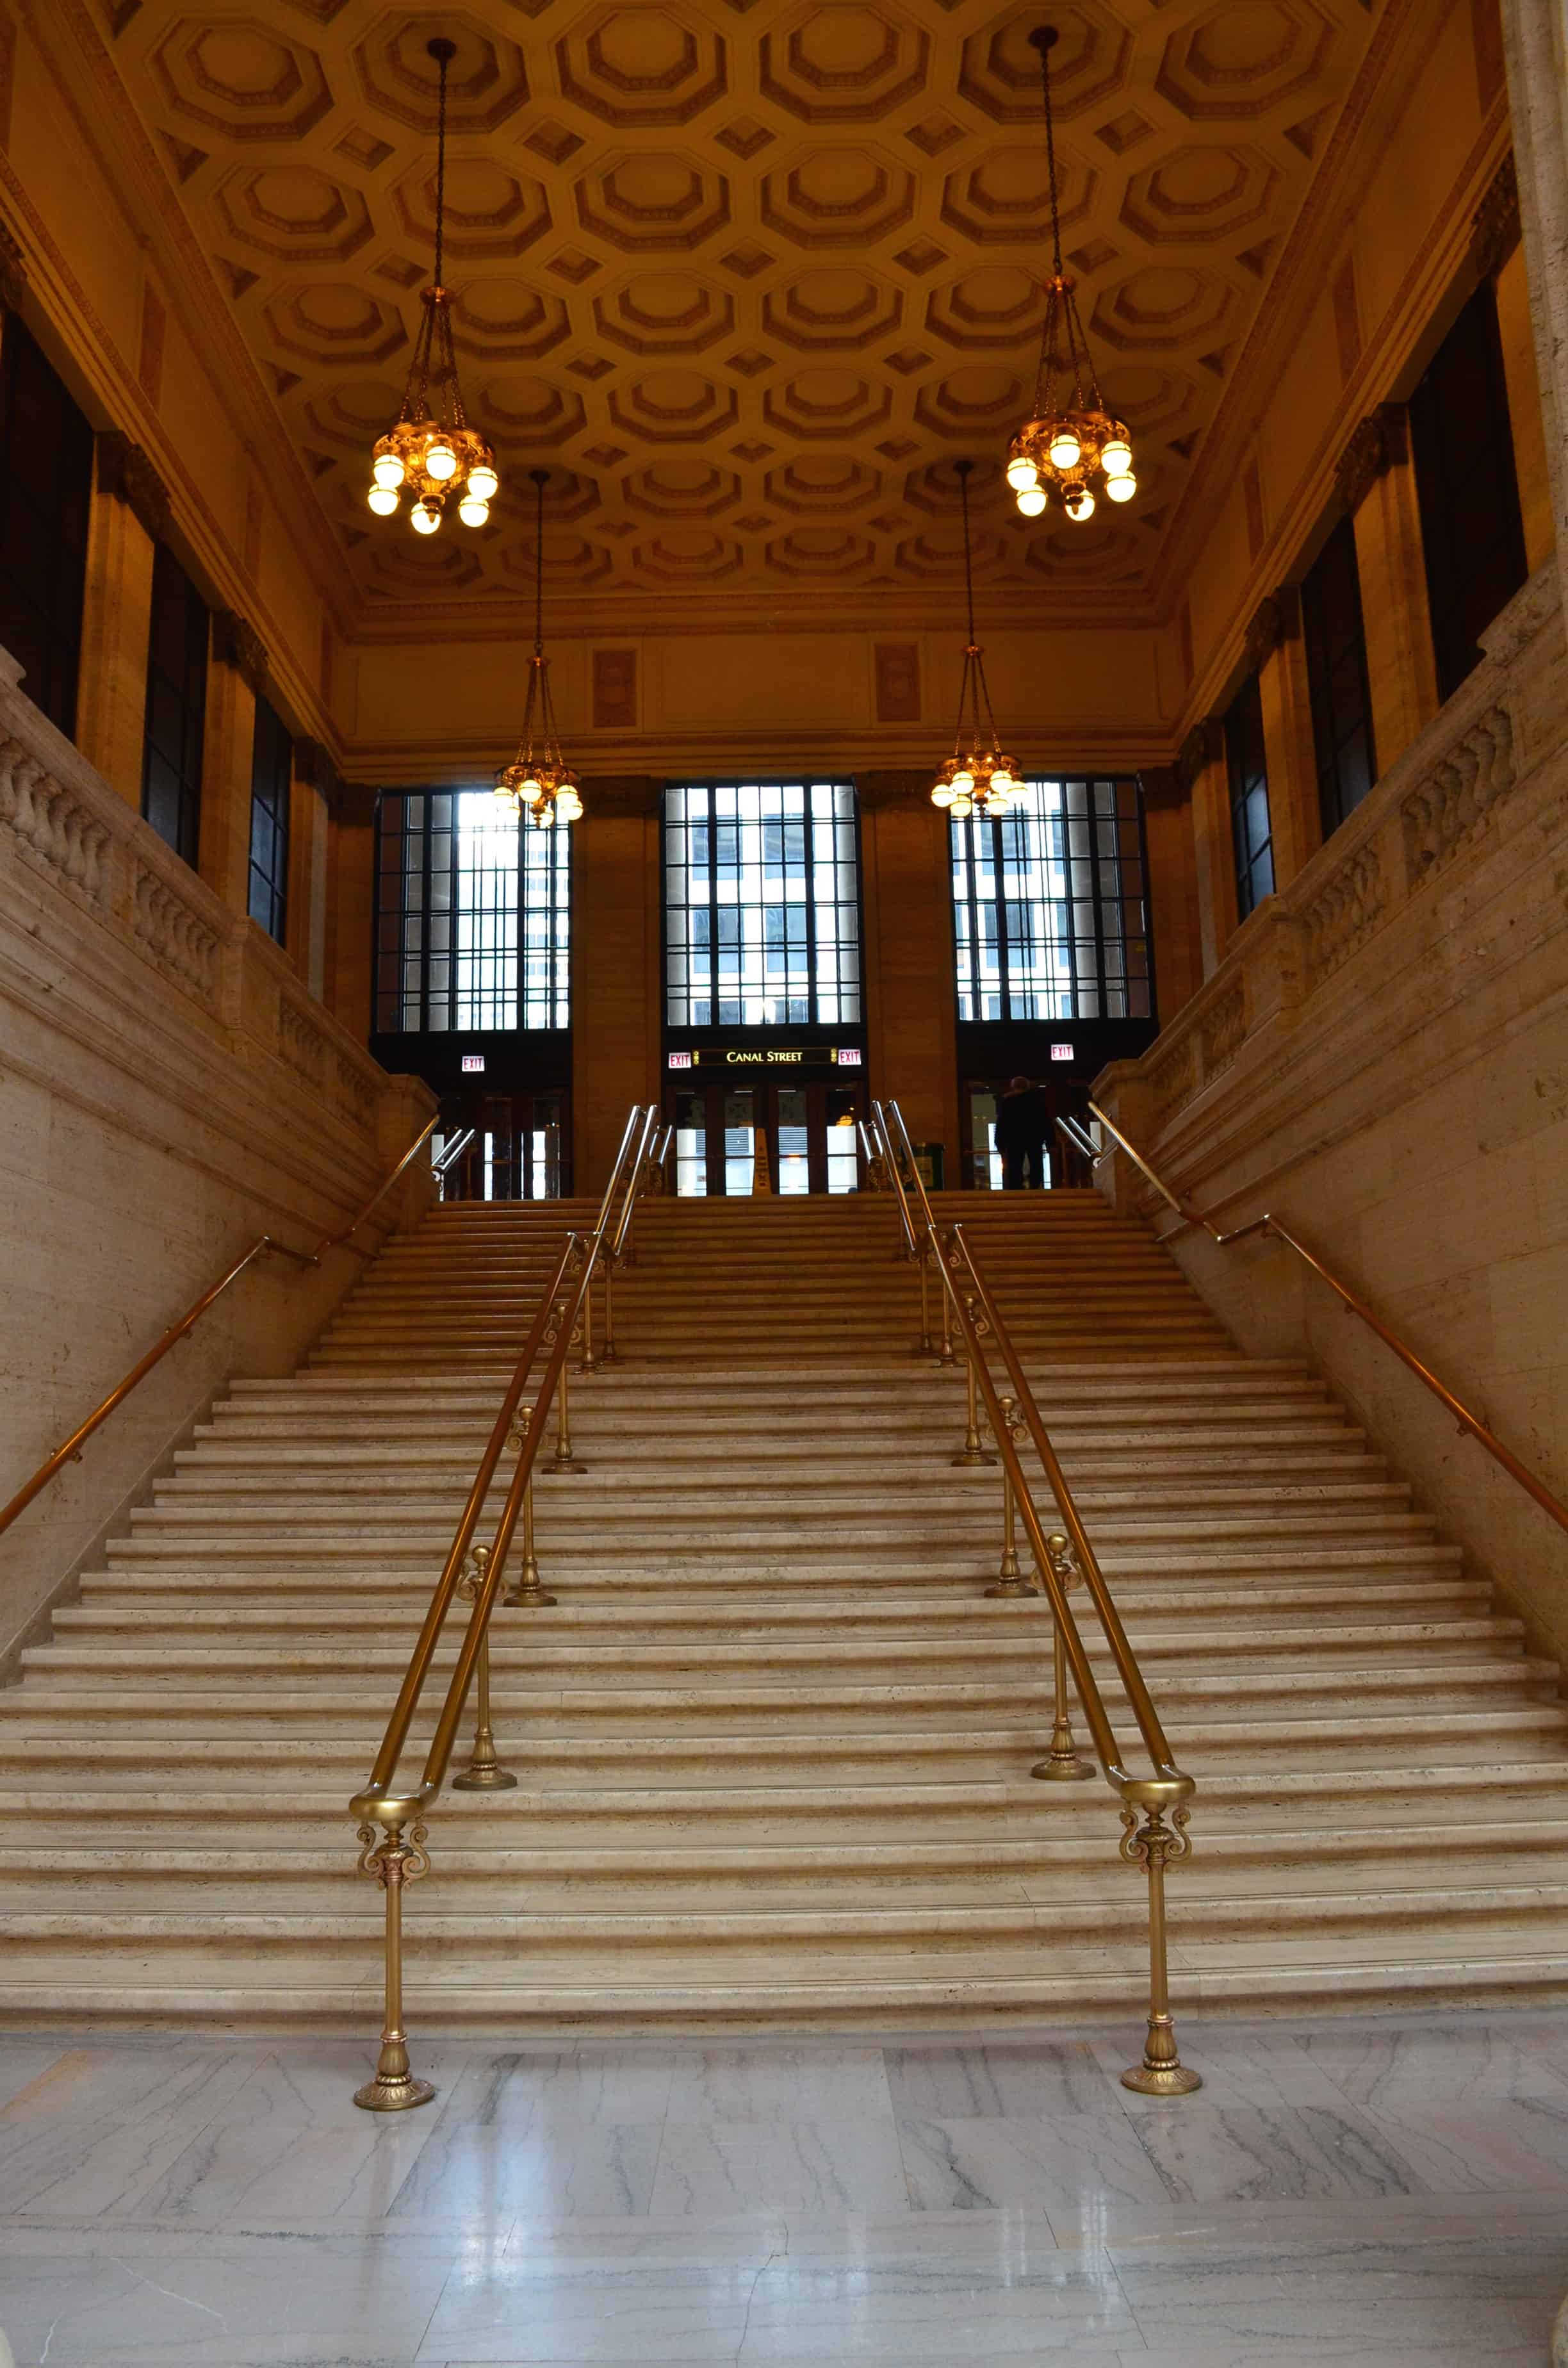 The stairs from The Untouchables at Union Station in Chicago, Illinois